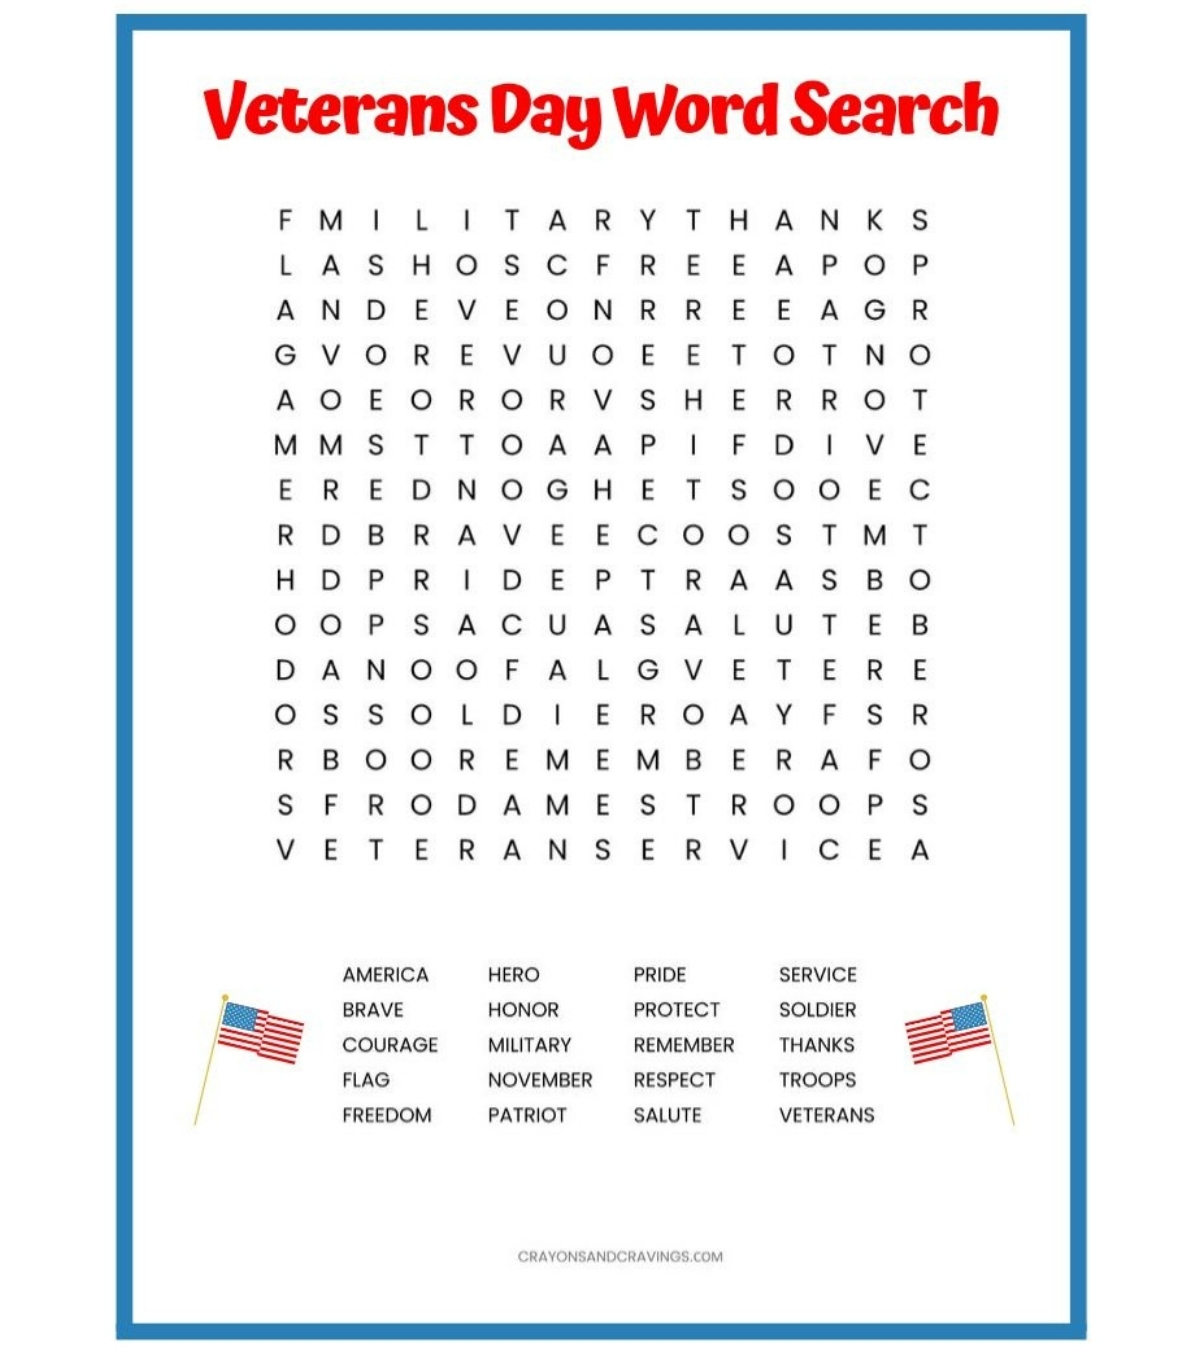 Veterans Day Word Search Printable